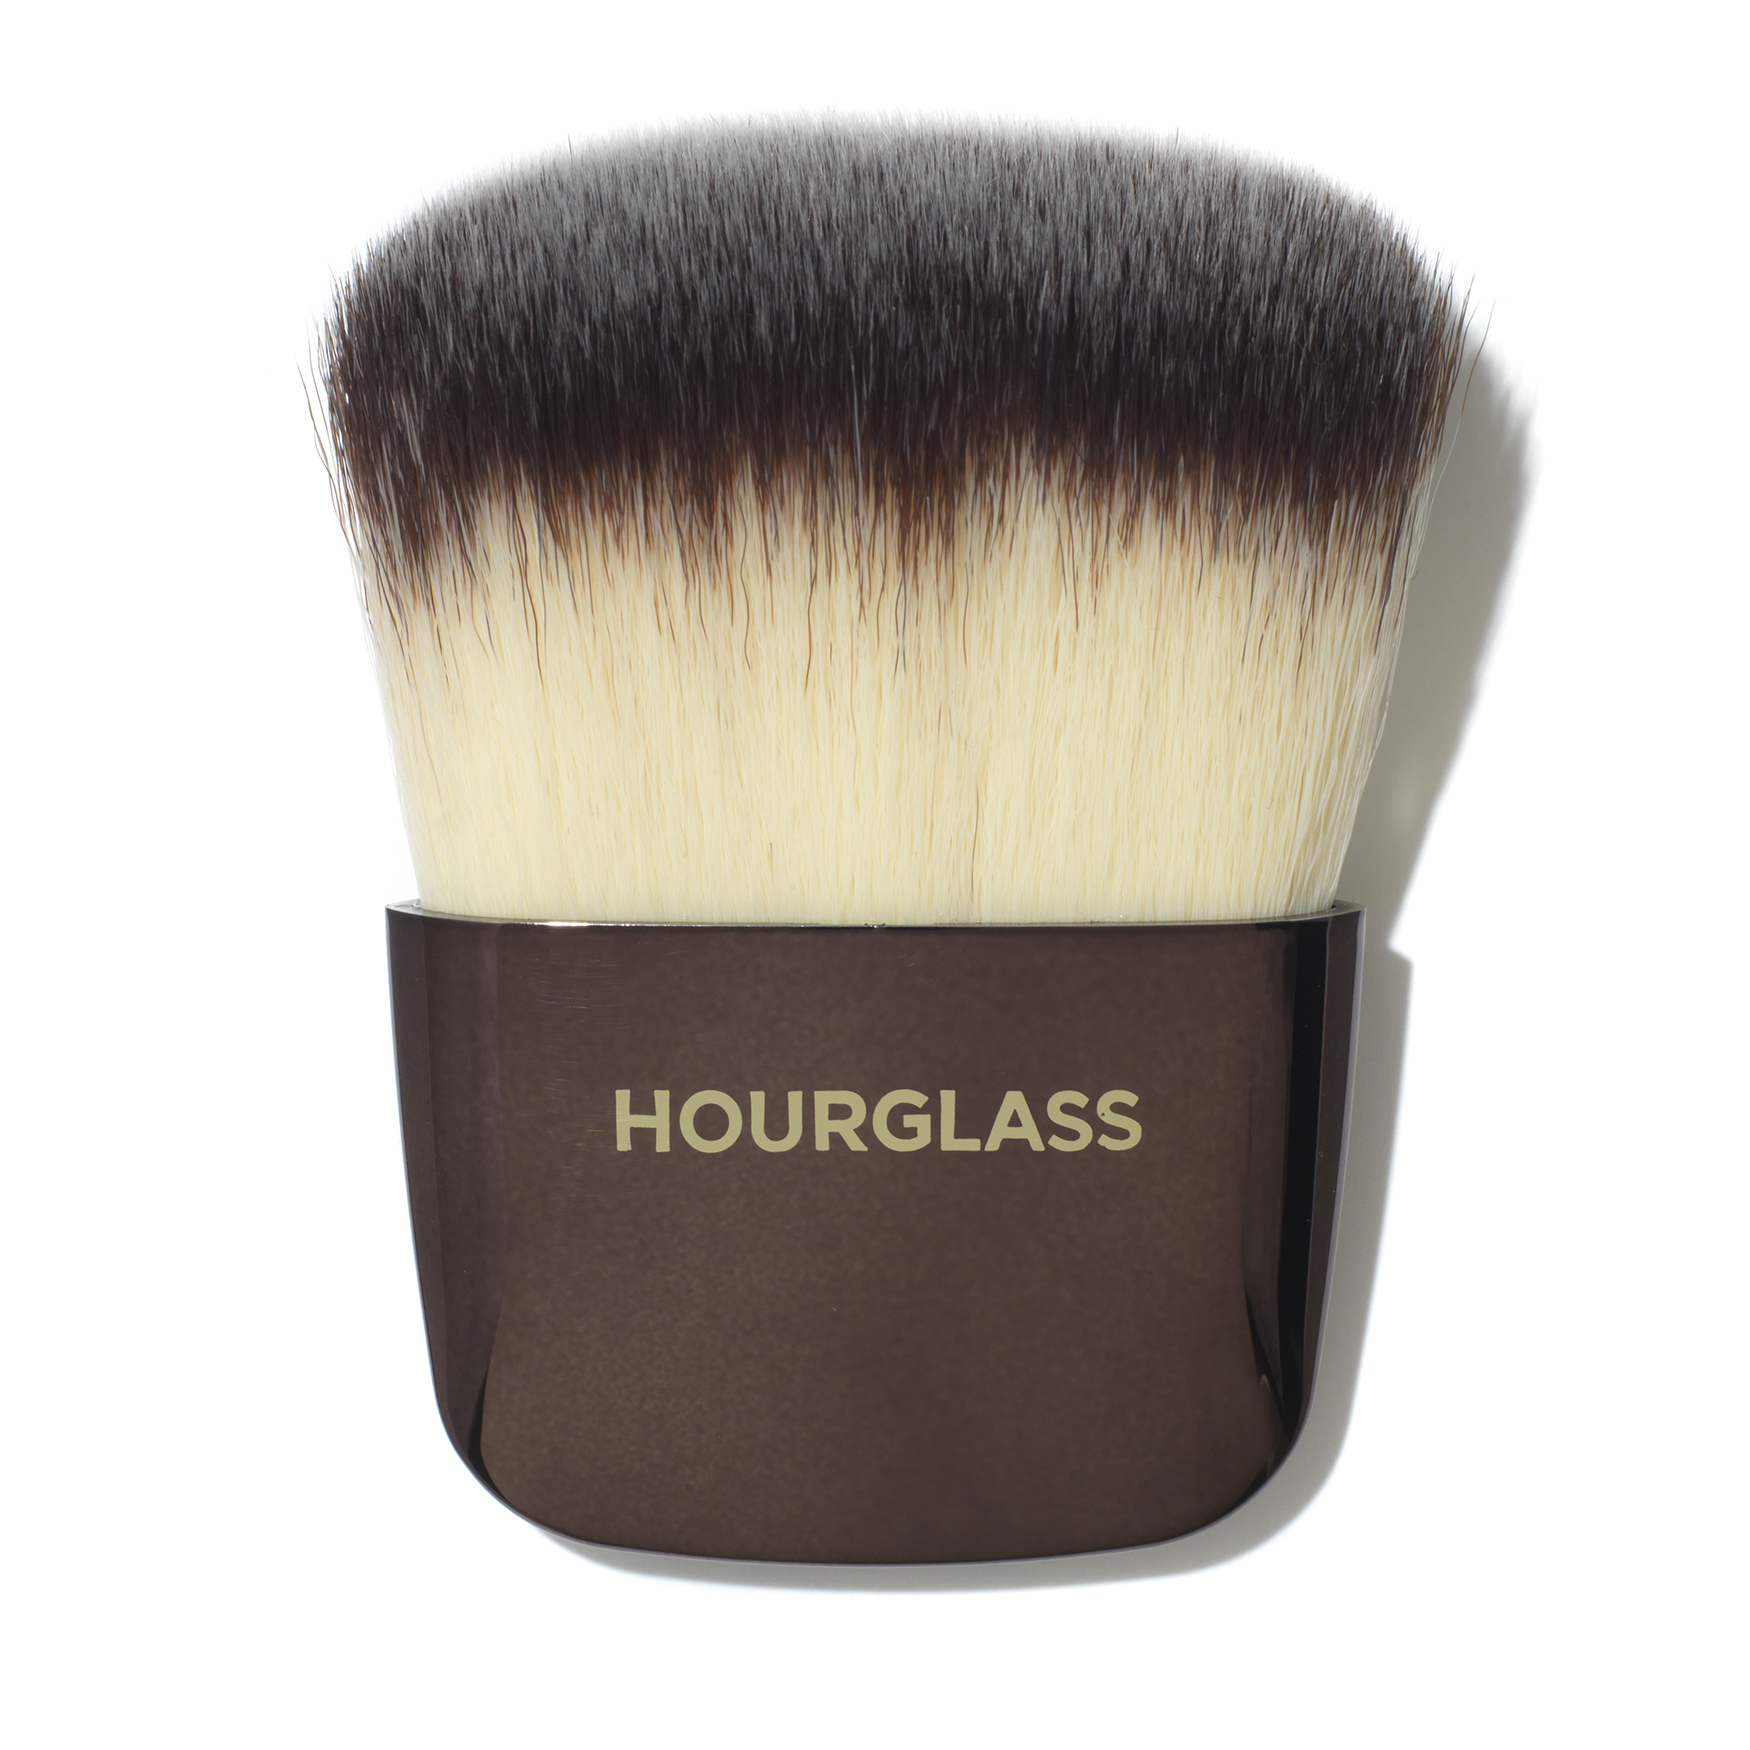 Hourglass Ambient Powder Brush | Space NK